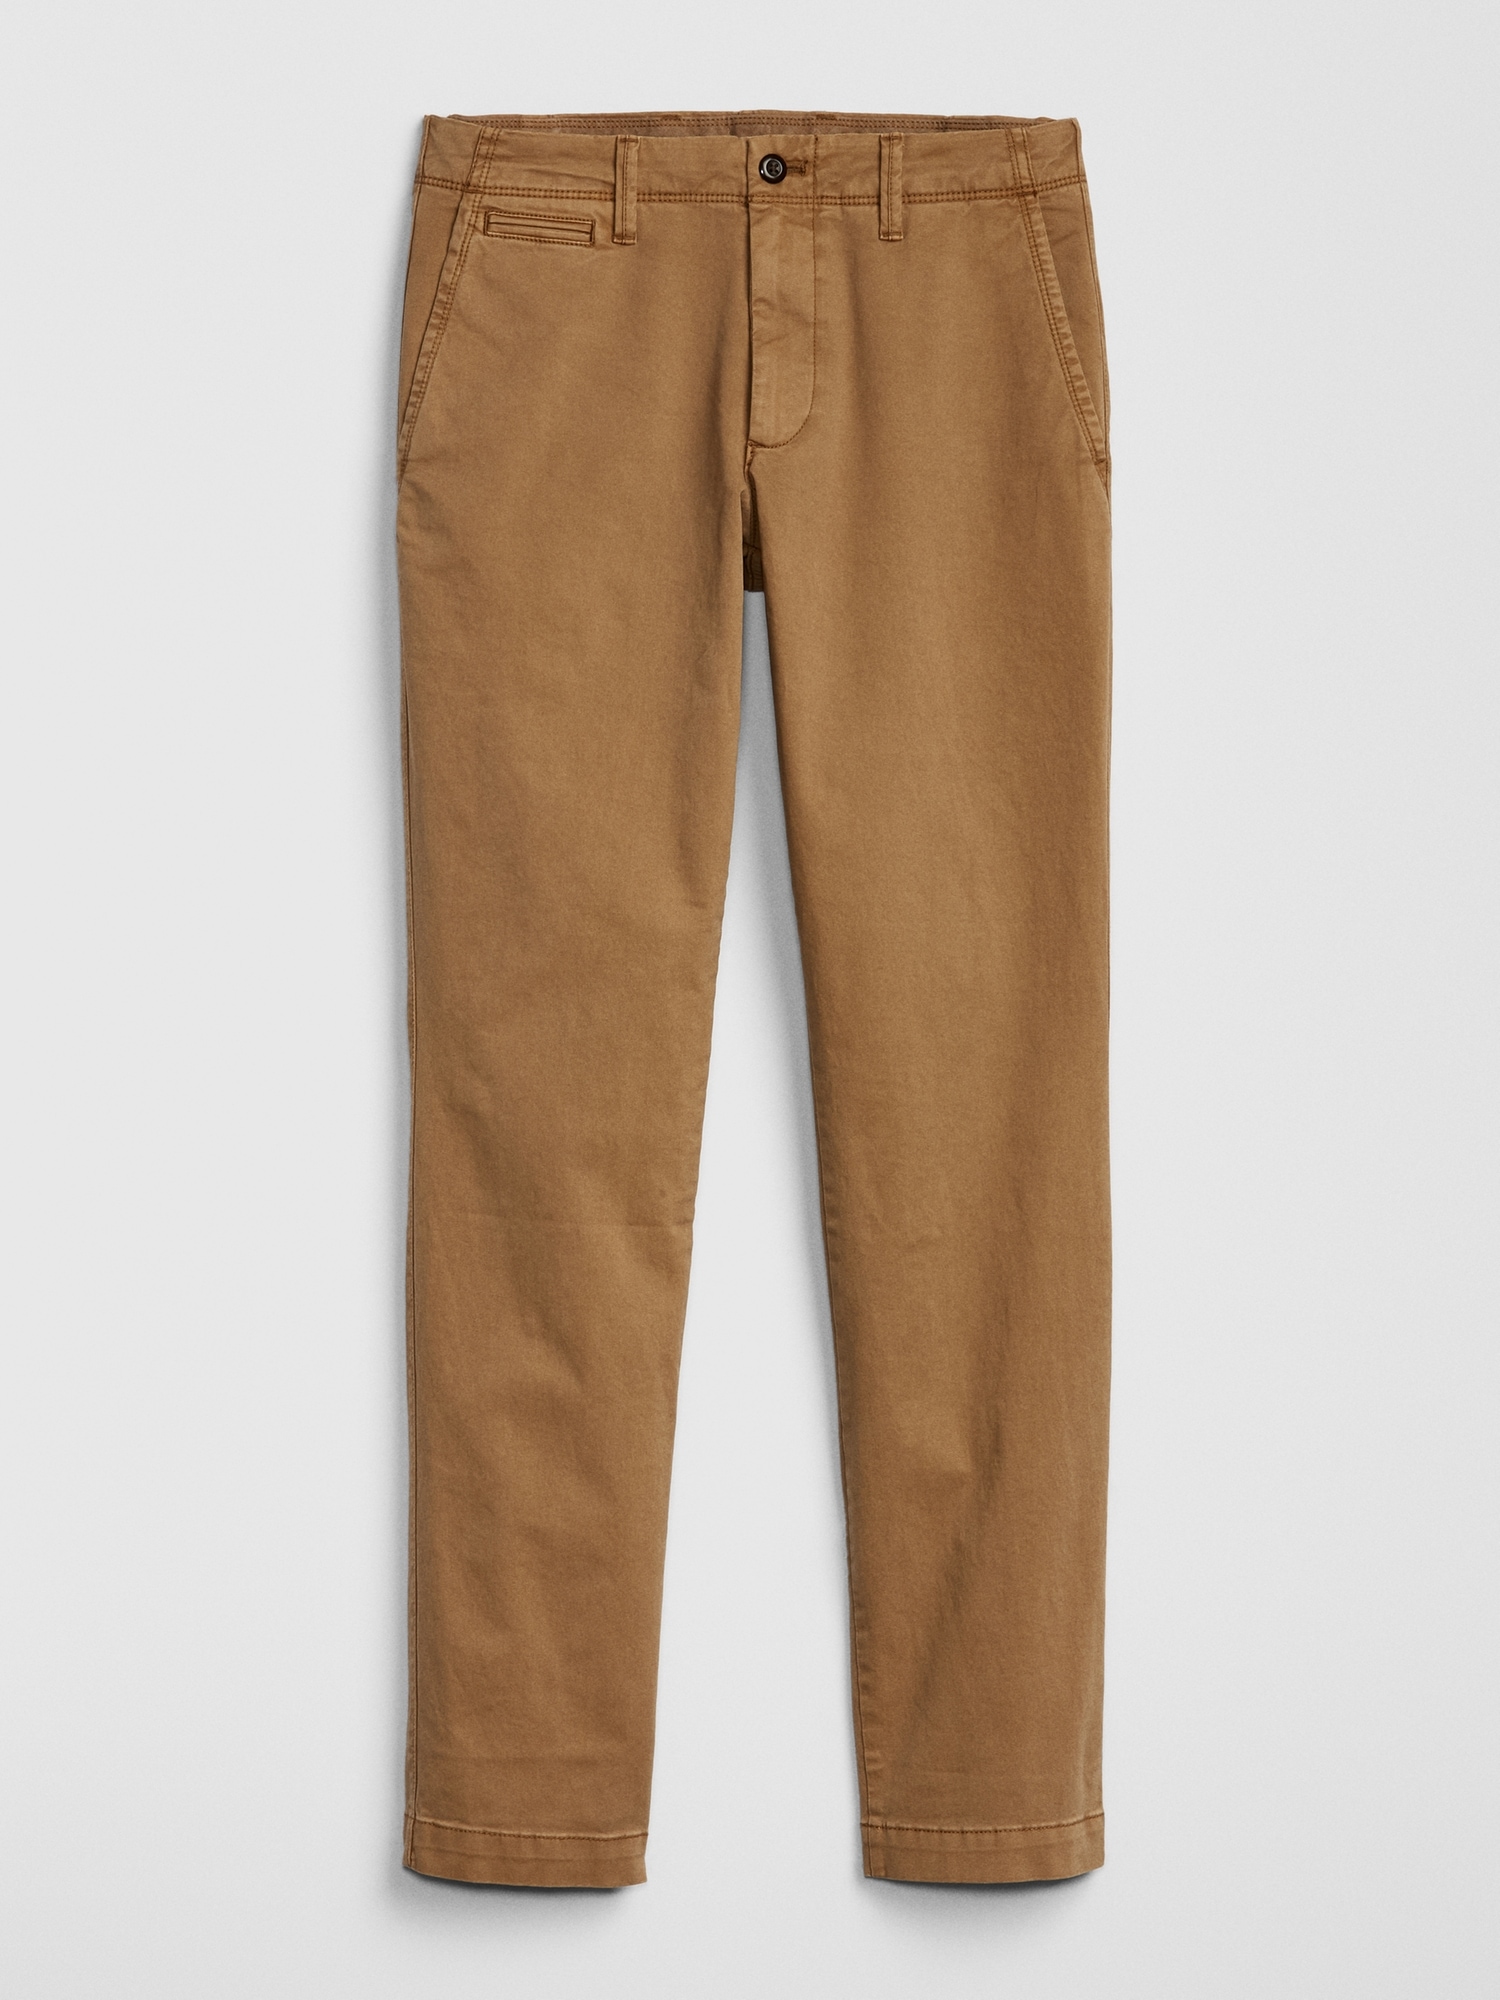 gap lived in tapered khaki